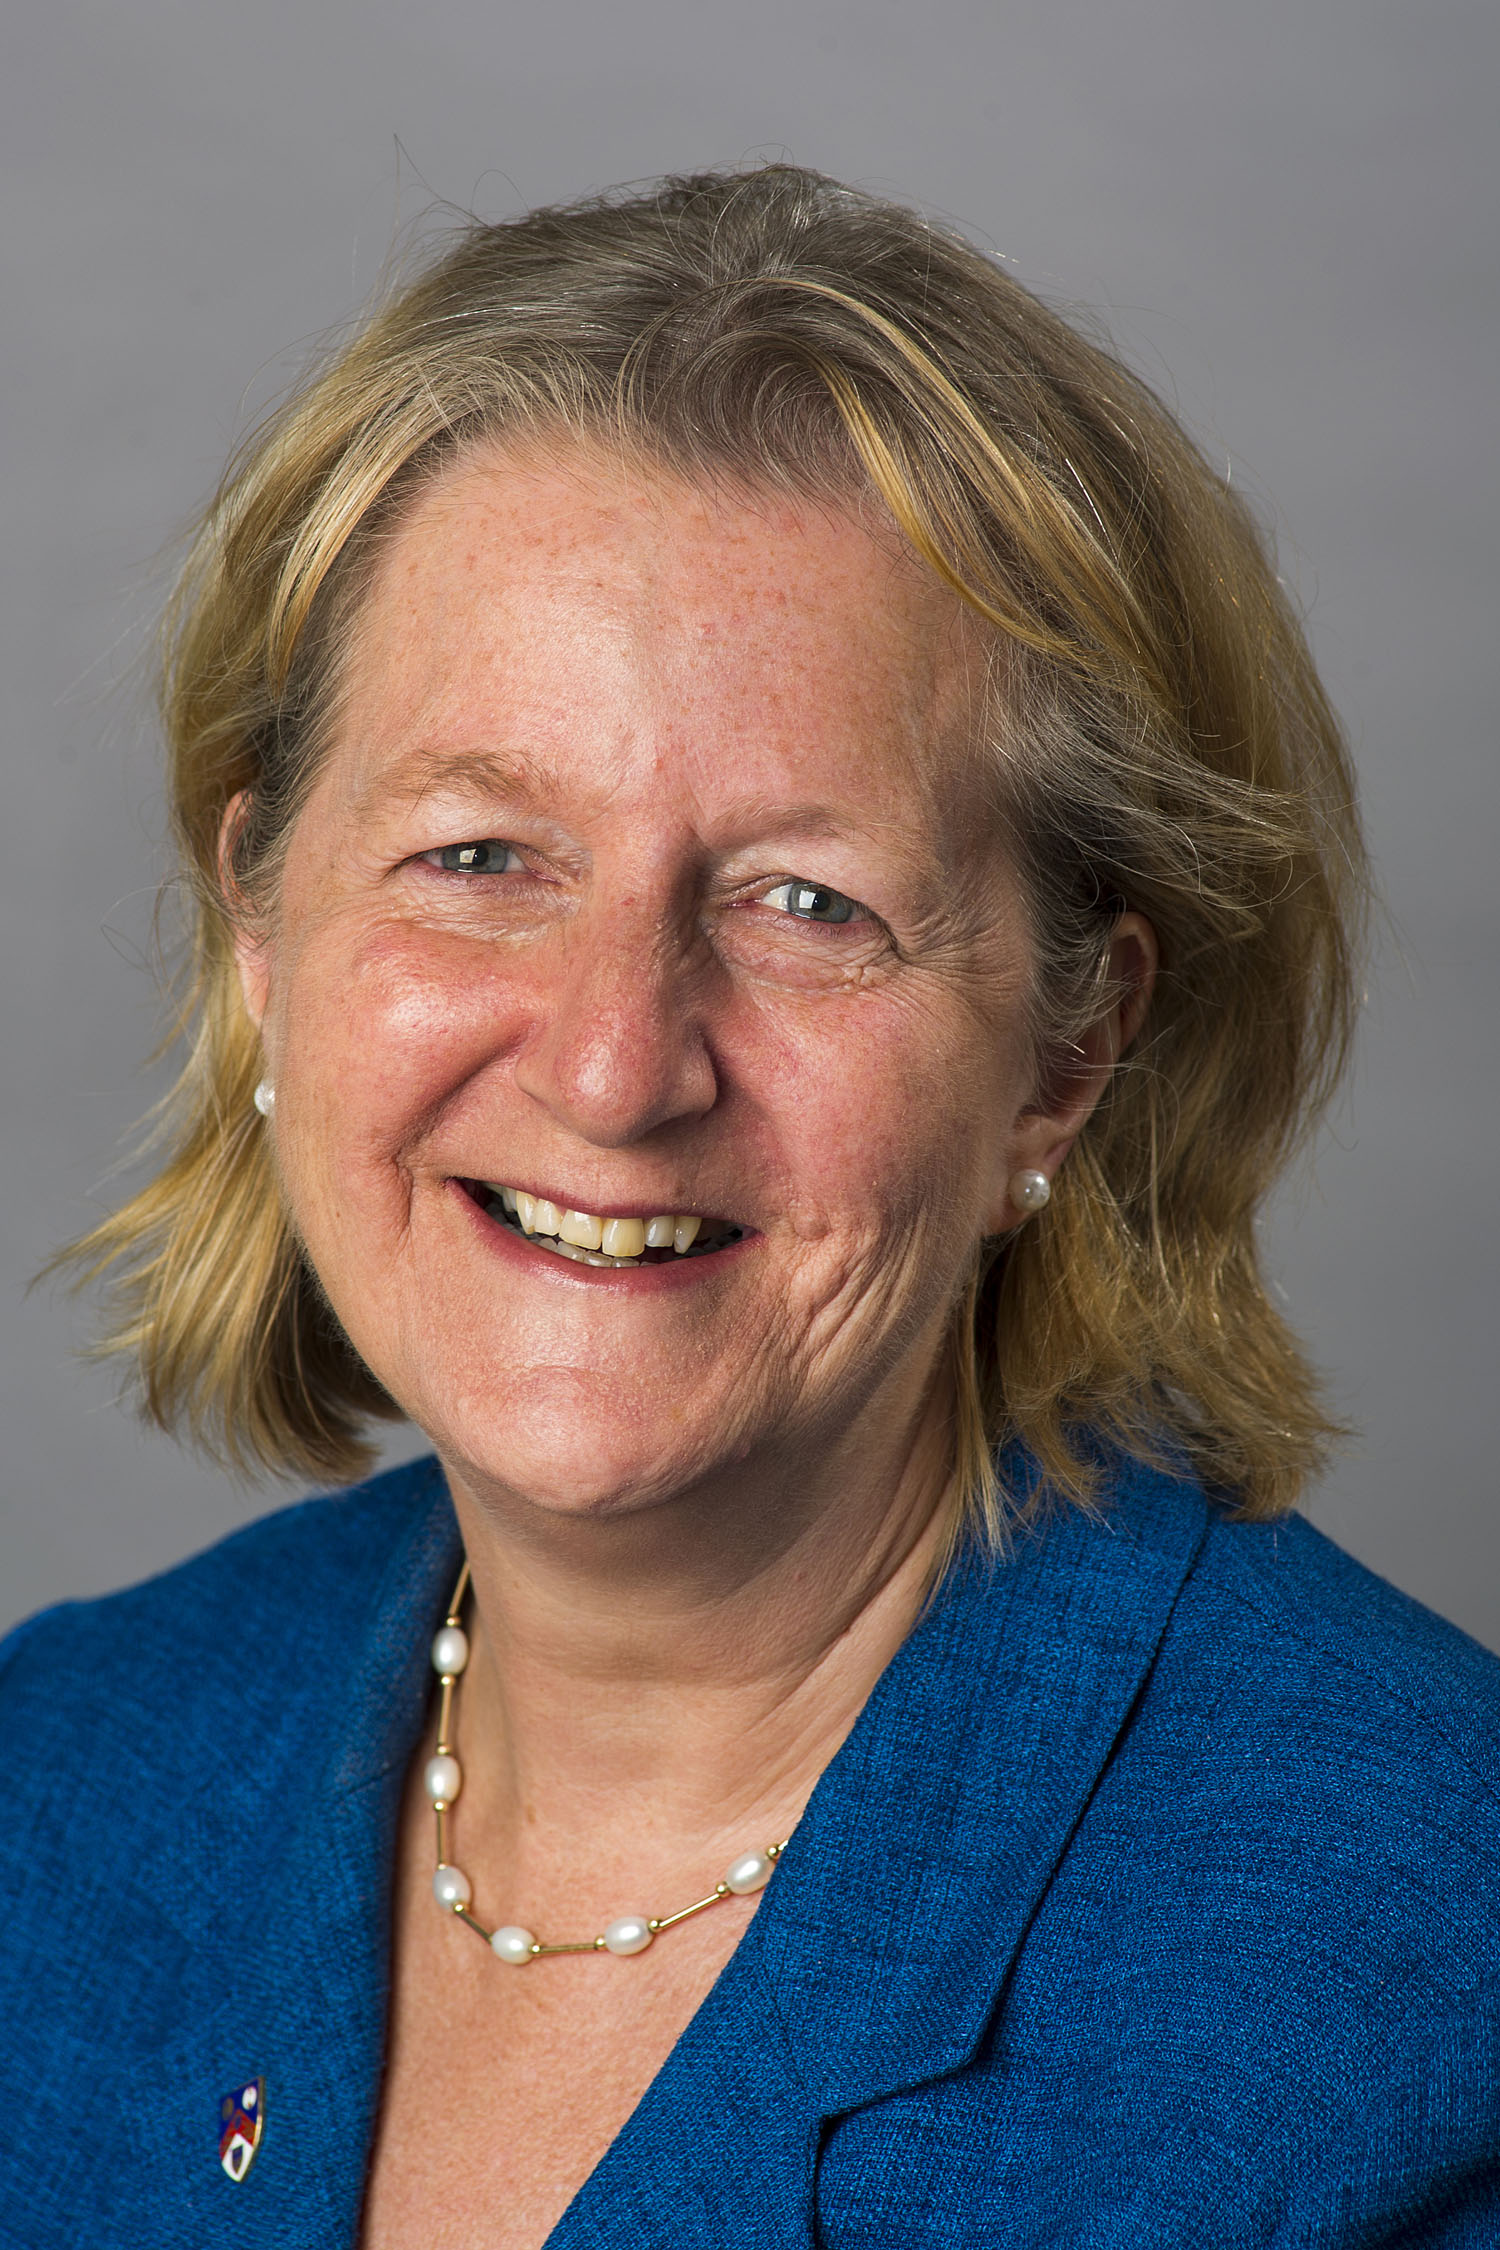 A portrait photograph of Councillor Ruth Dombey